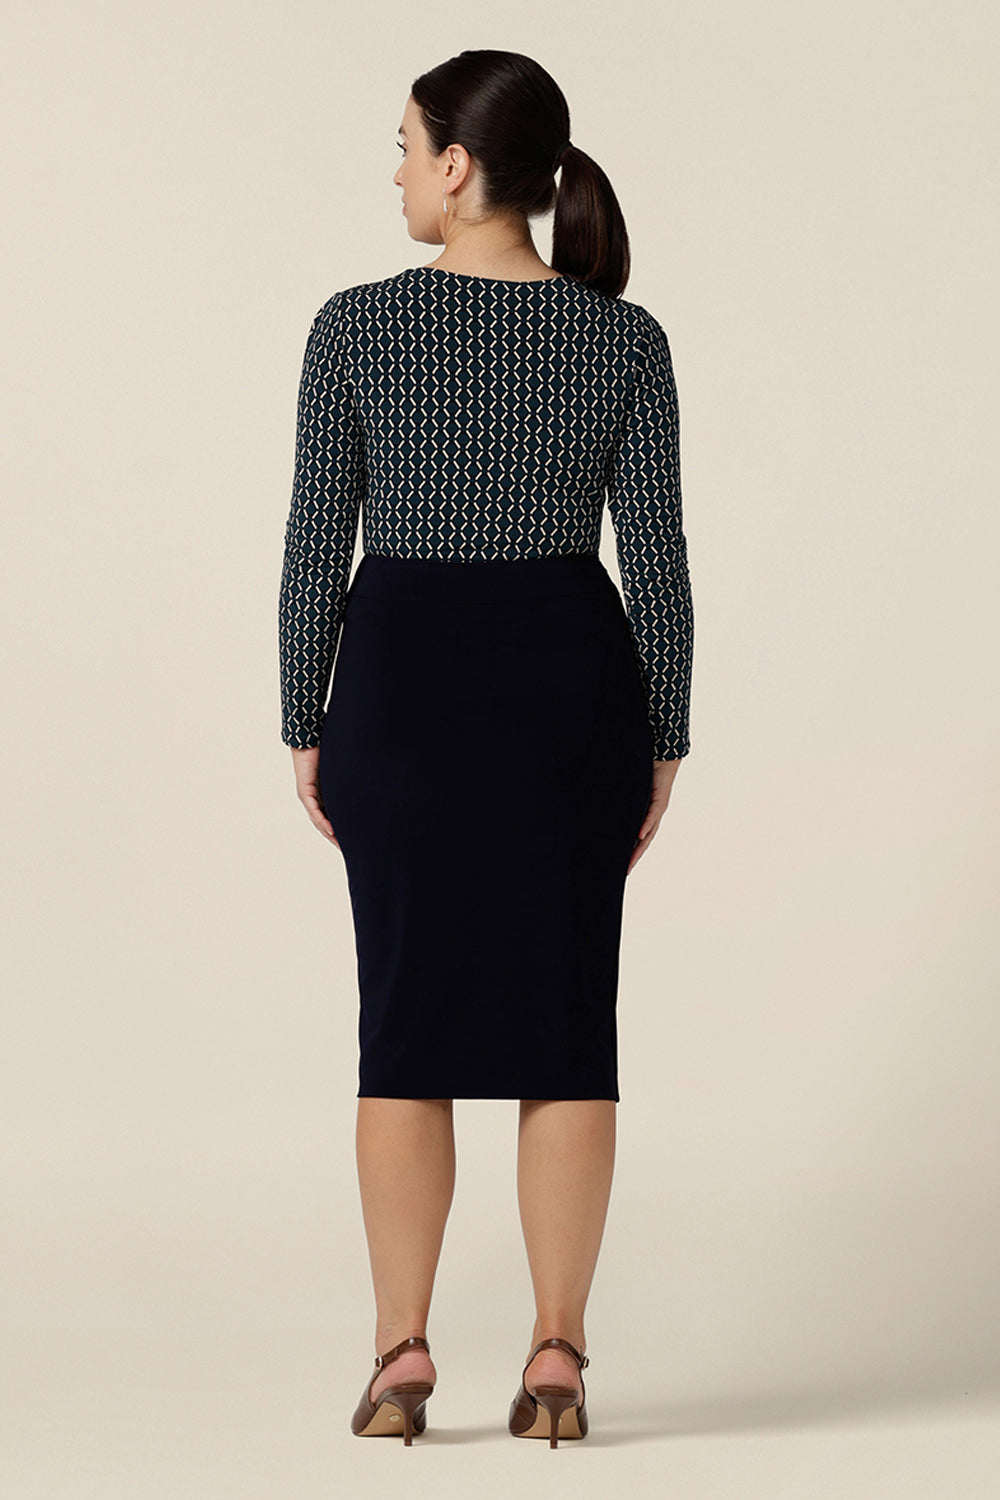 Back view of a good work top for corporate capsule wardrobes, this long sleeve top has a squared scoop neckline and blue and white geometric print. Worn with a navy blue pencil skirt, both are made in Australia. This office wear top is ready to shop in sizes 8 to 24.